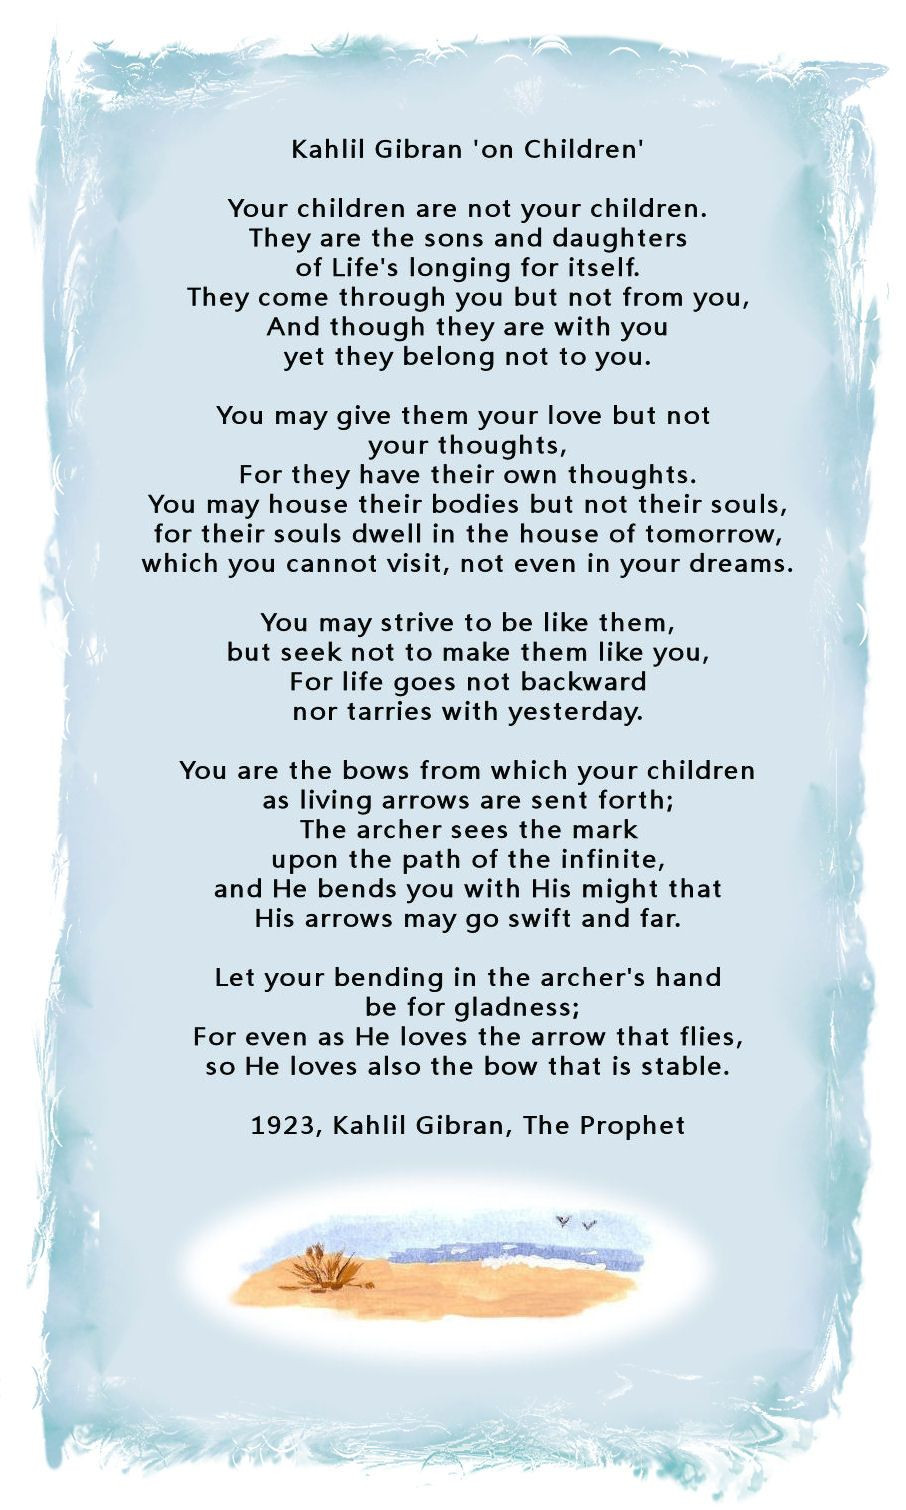 Kahlil Gibran Quotes Children
 Children by Kahlil Gibran The Prophet 1923 There is